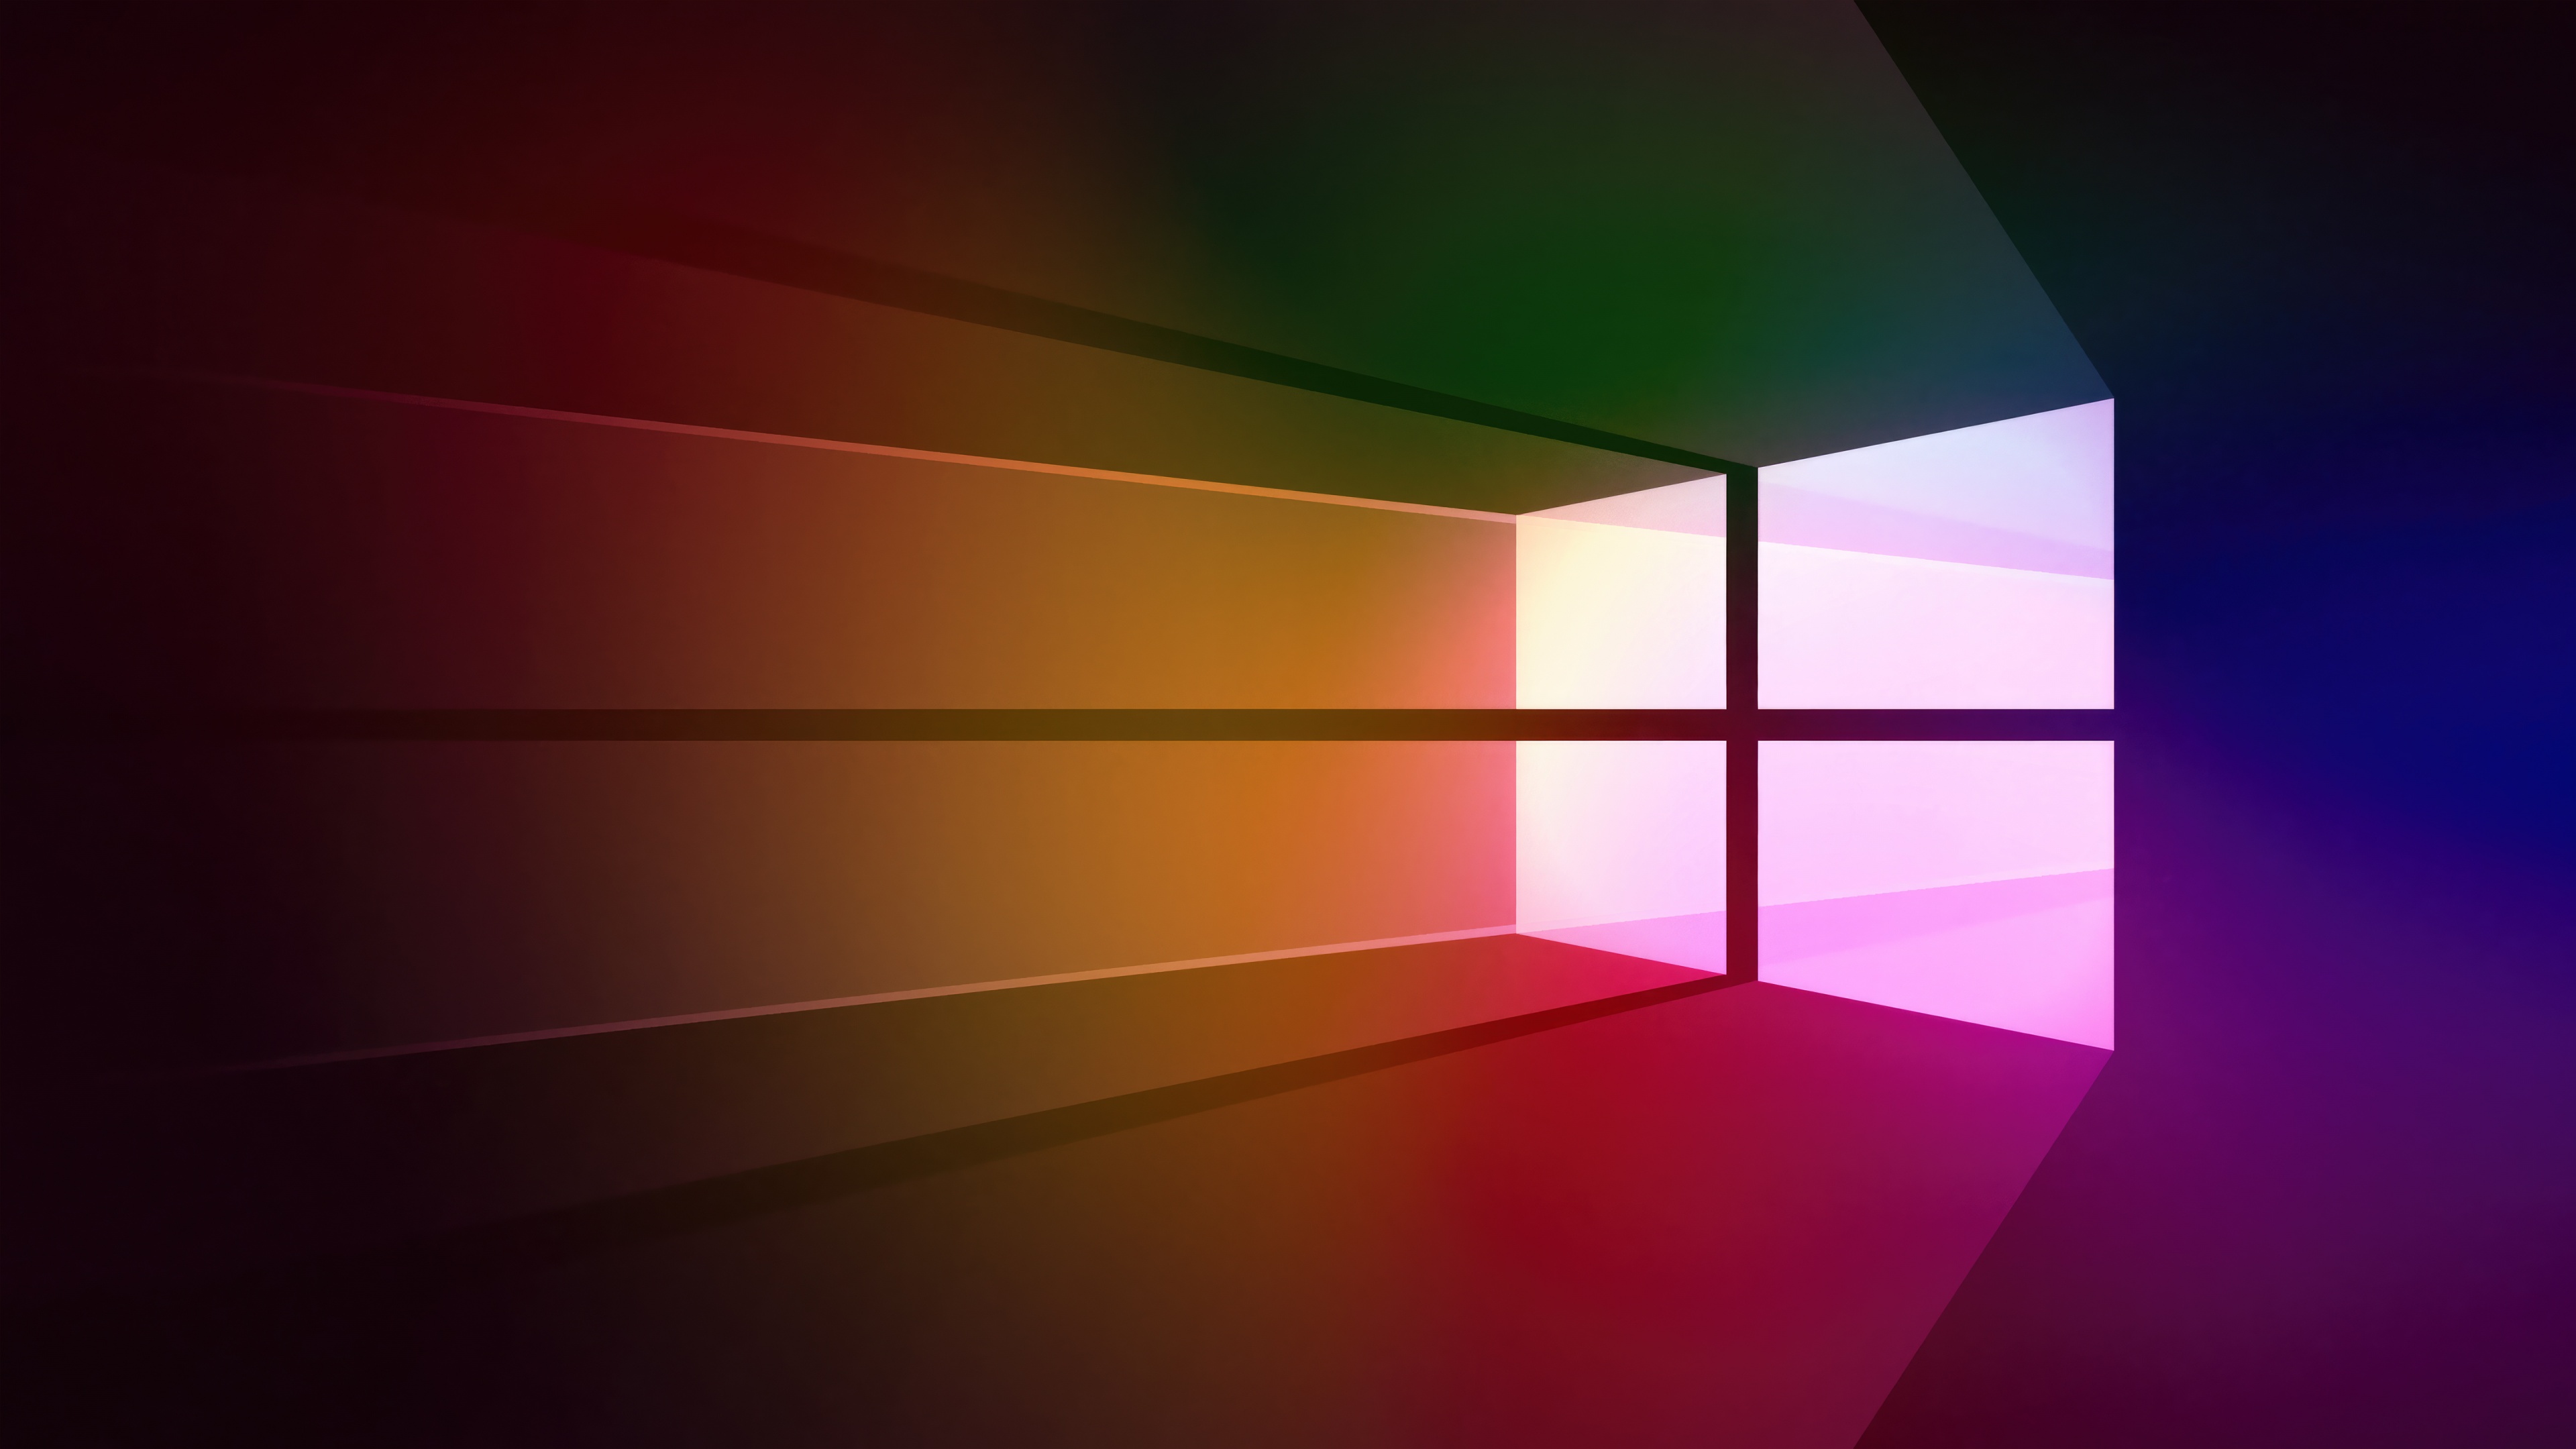 Windows 10 Default Wallpaper for lumia Devices by Yashlaptop on DeviantArt